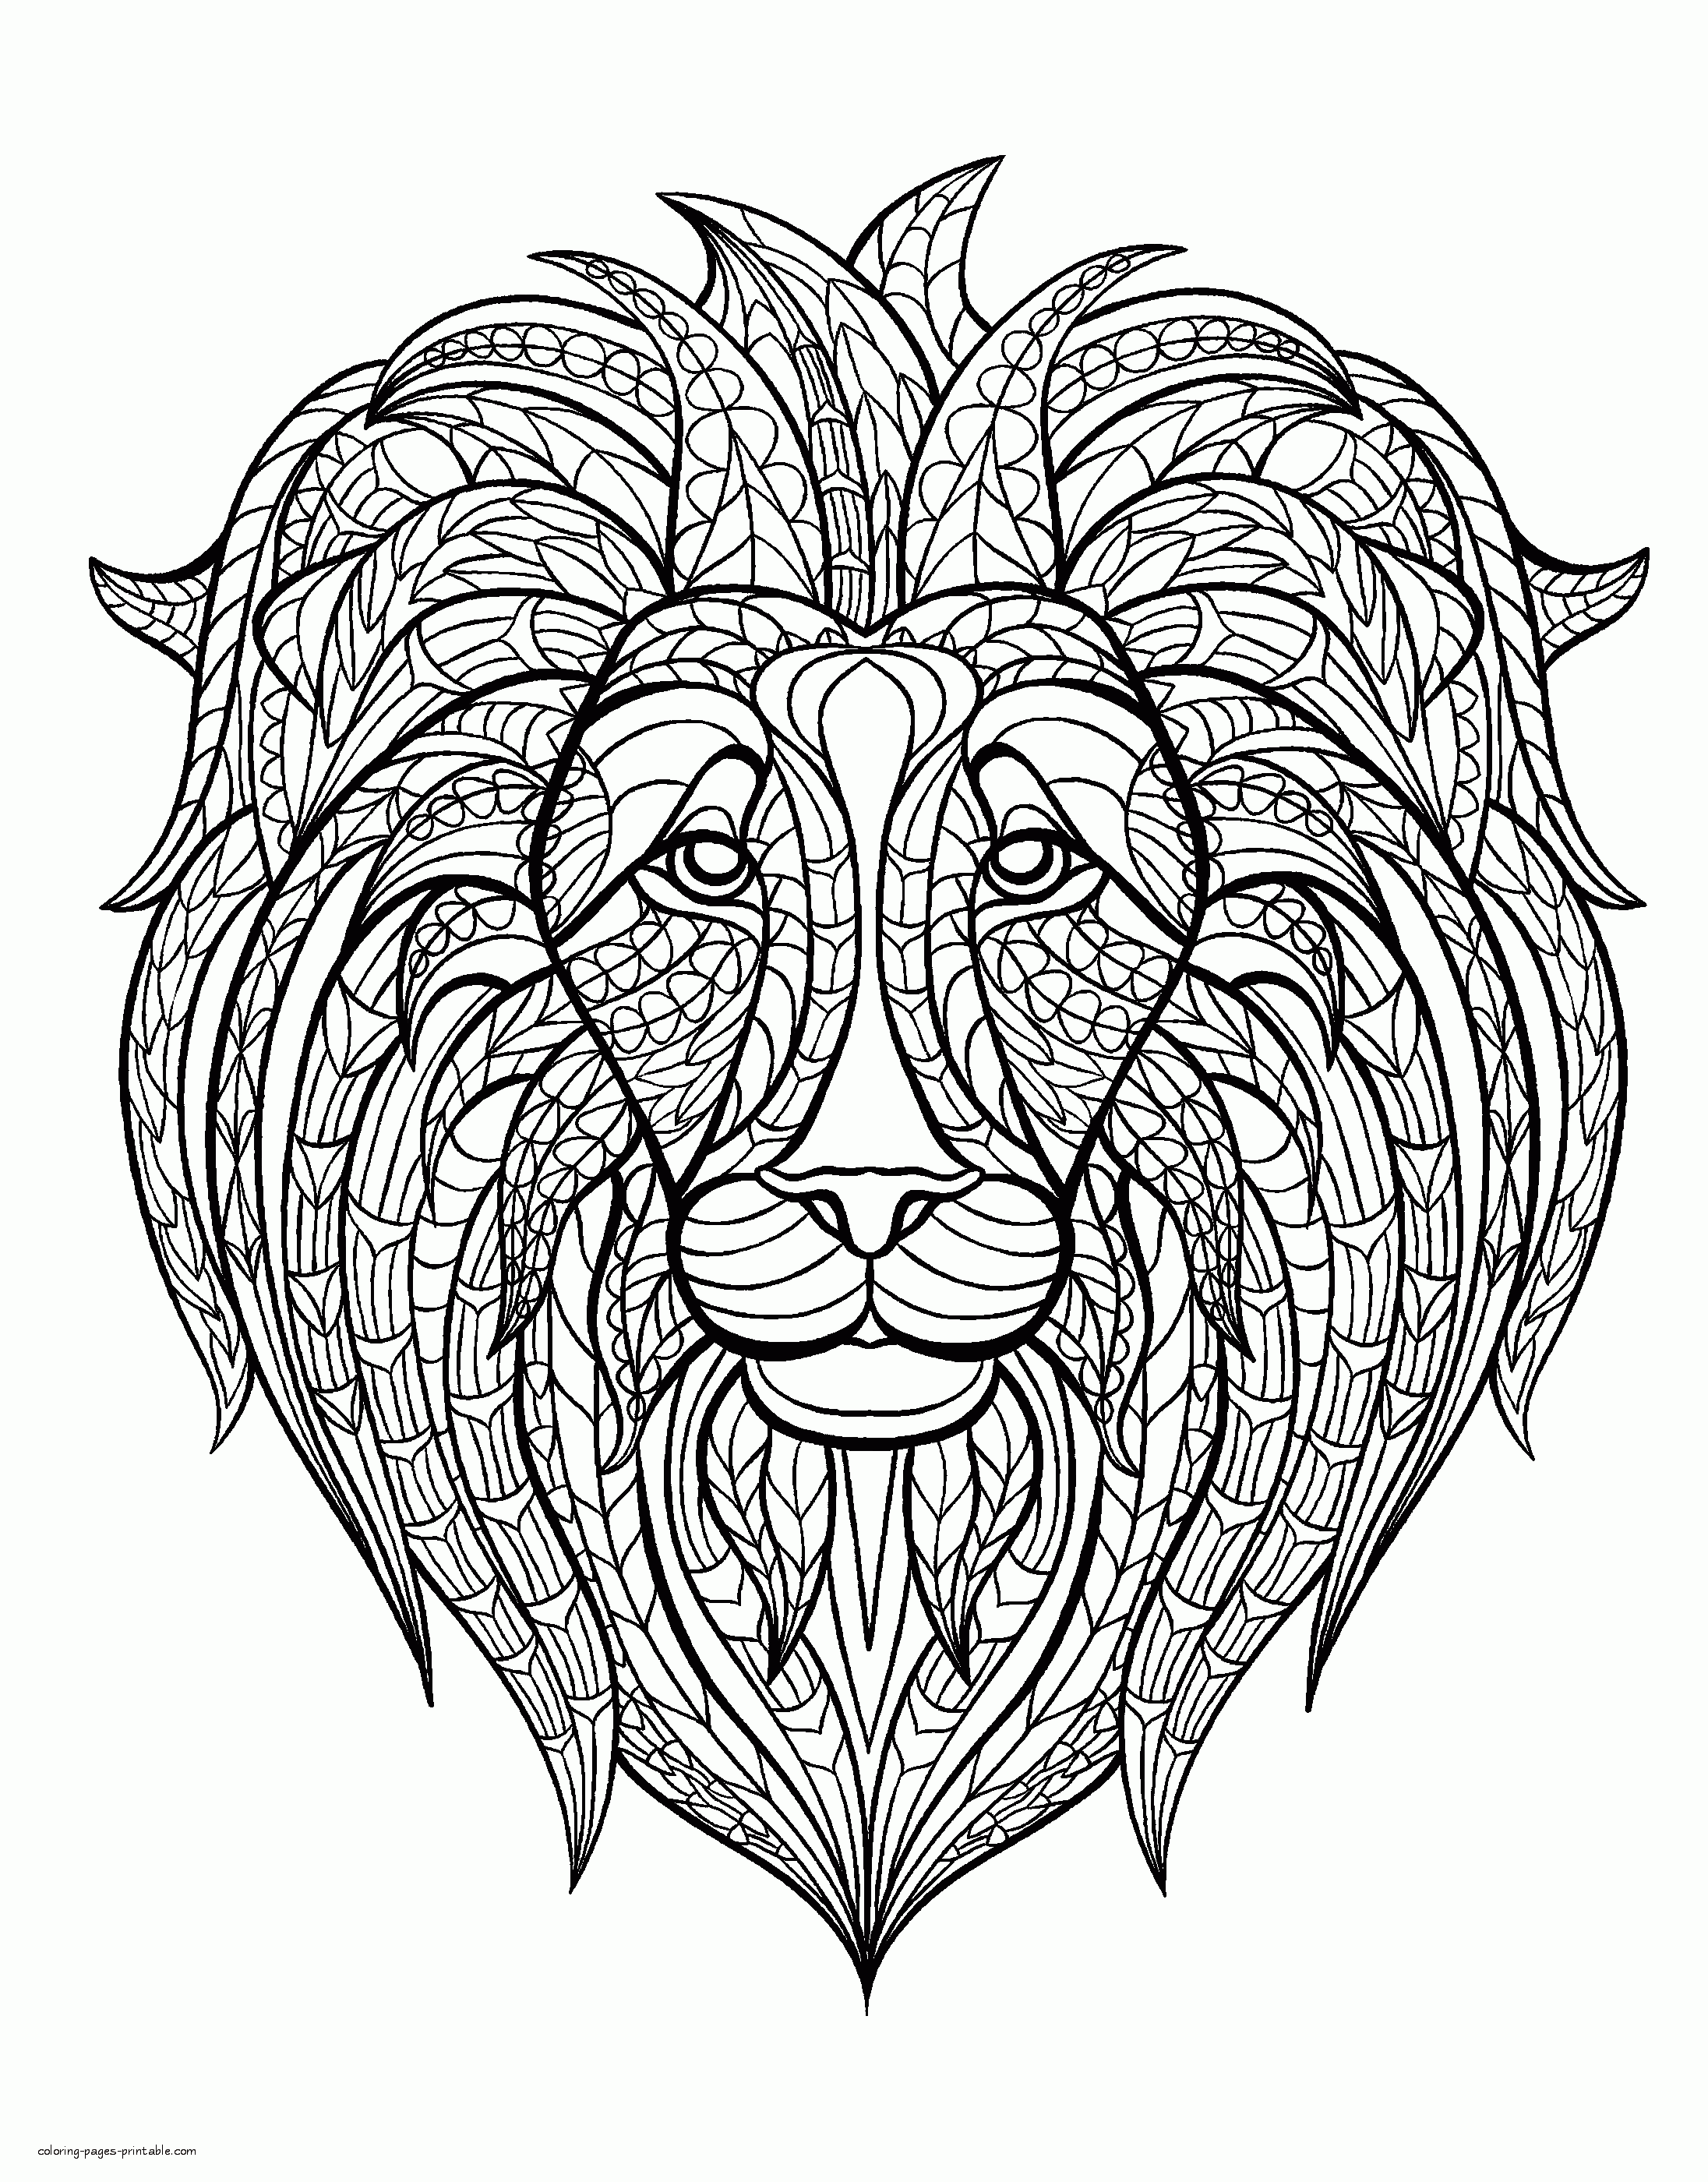 Lion Head Coloring Pages    COLORING PAGES PRINTABLE.COM